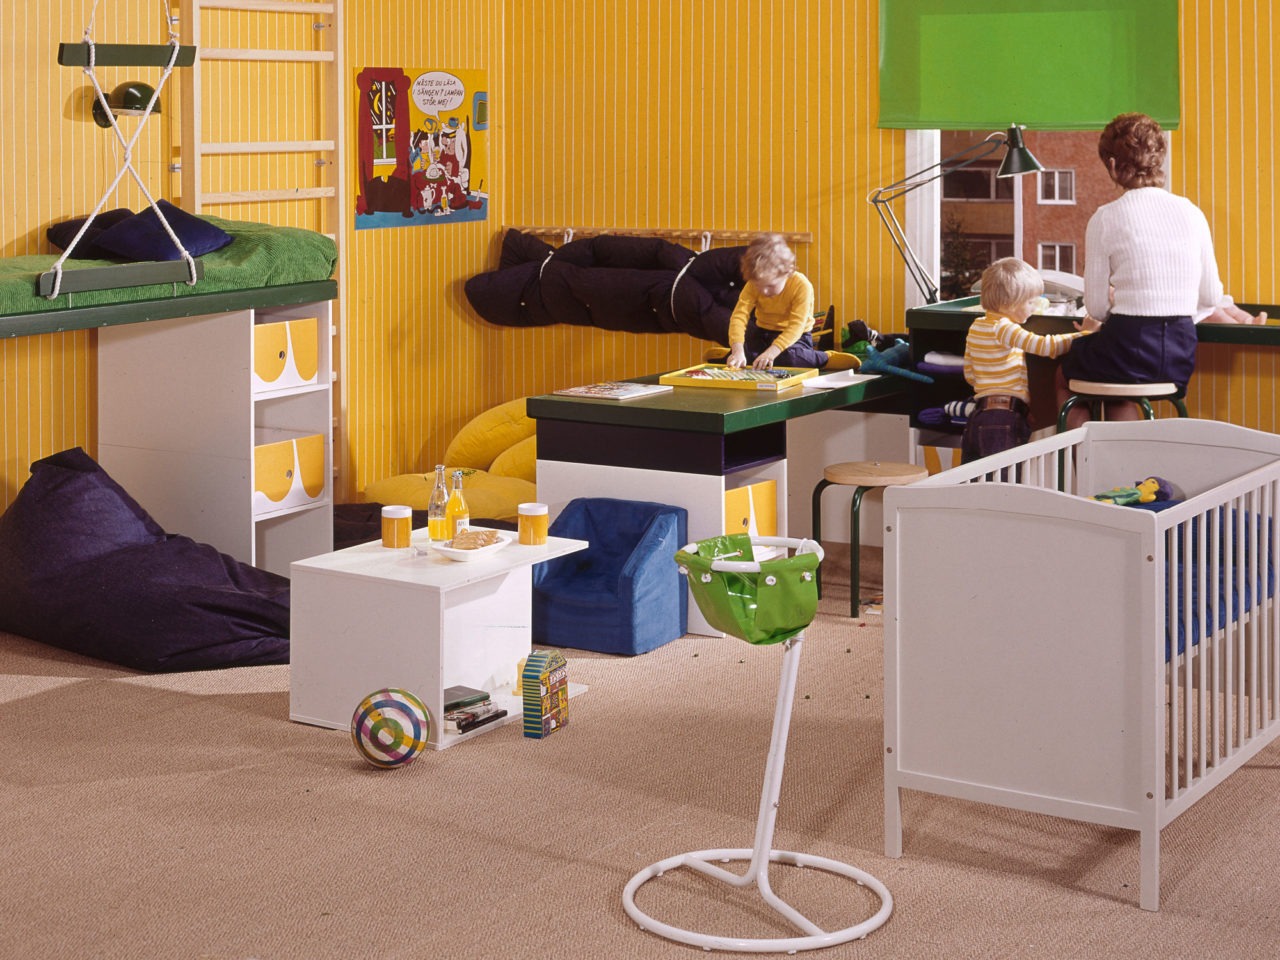 A woman sits at a changing table with a baby, in a yellow room with a cot, toys and two children playing nearby.